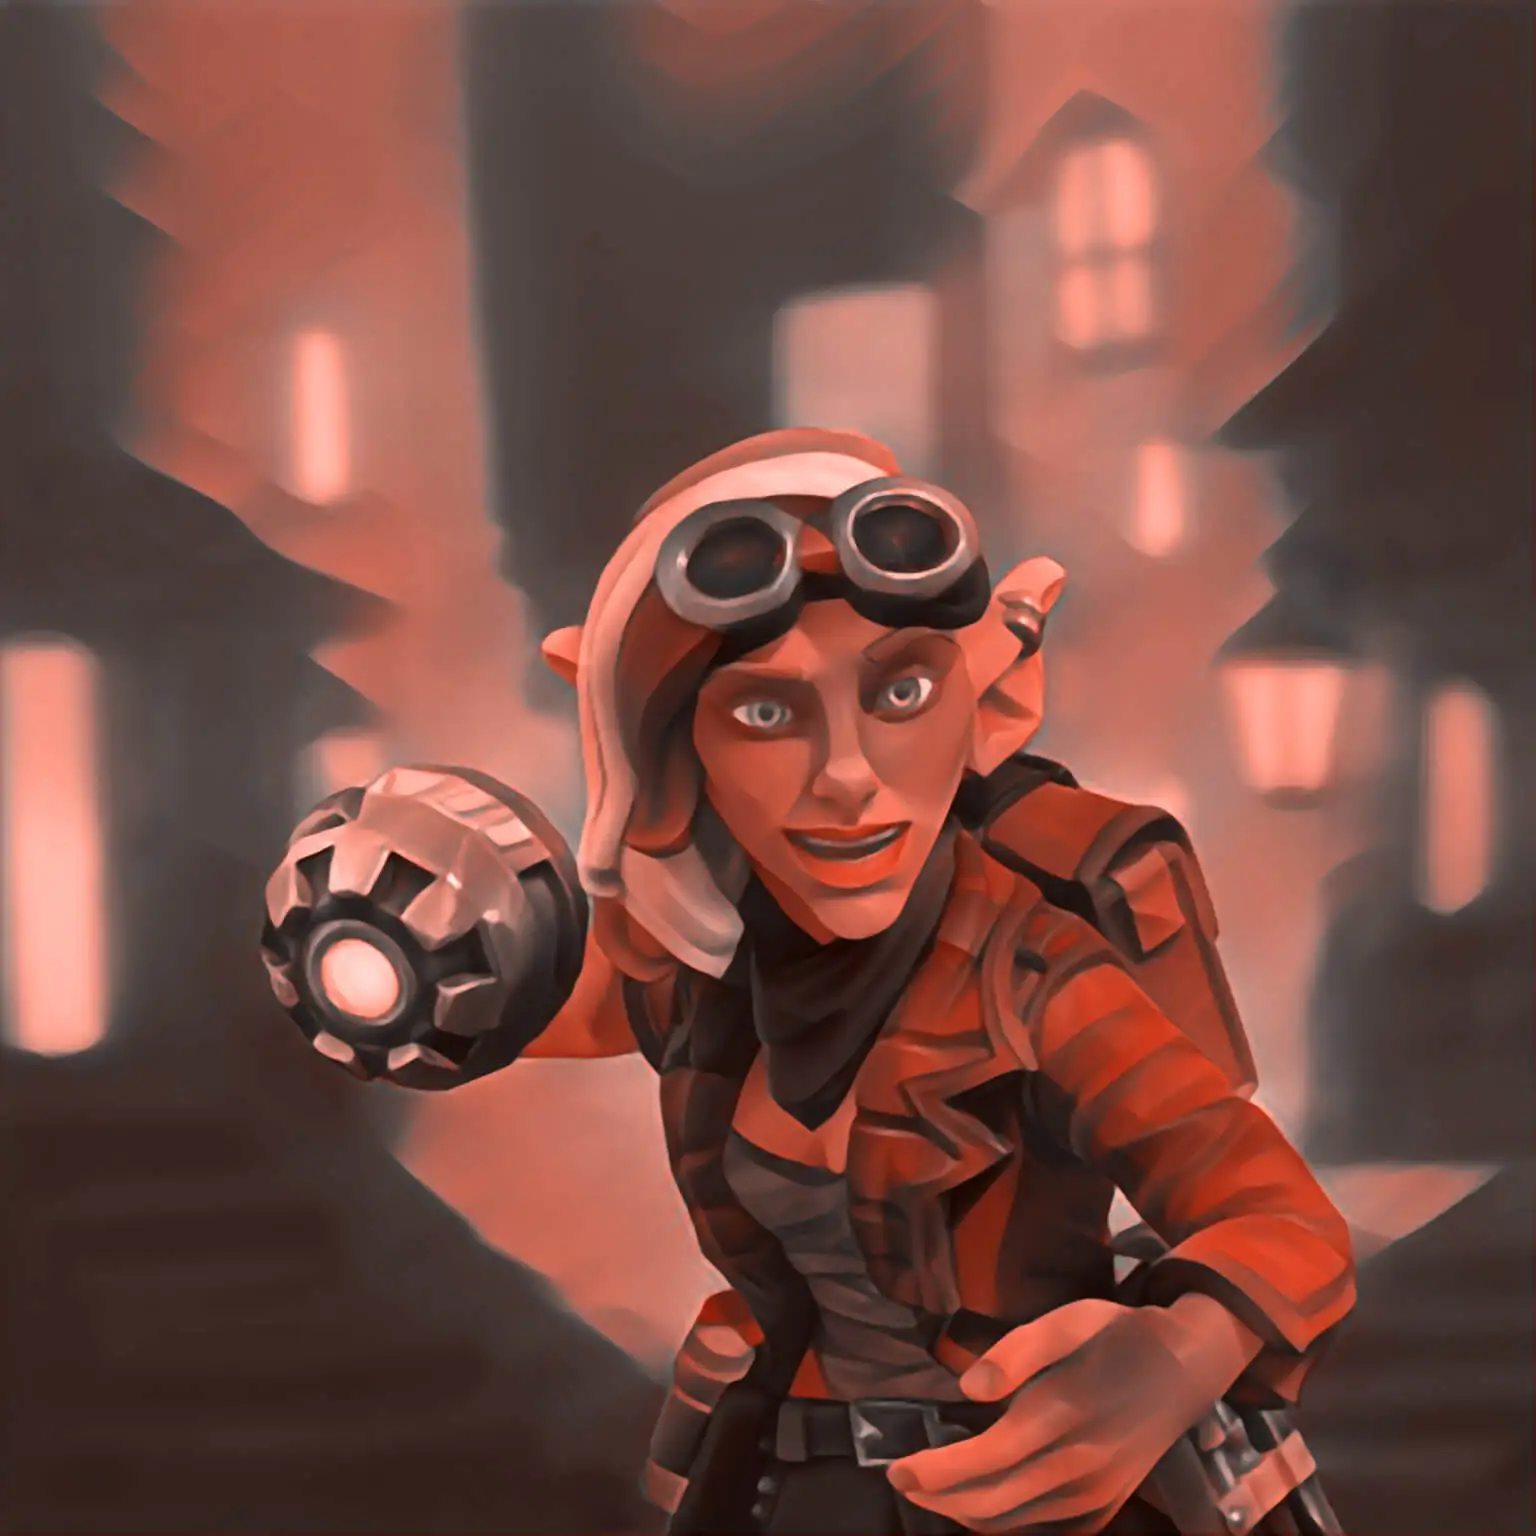 Illustration of a gnome woman with an explosive device